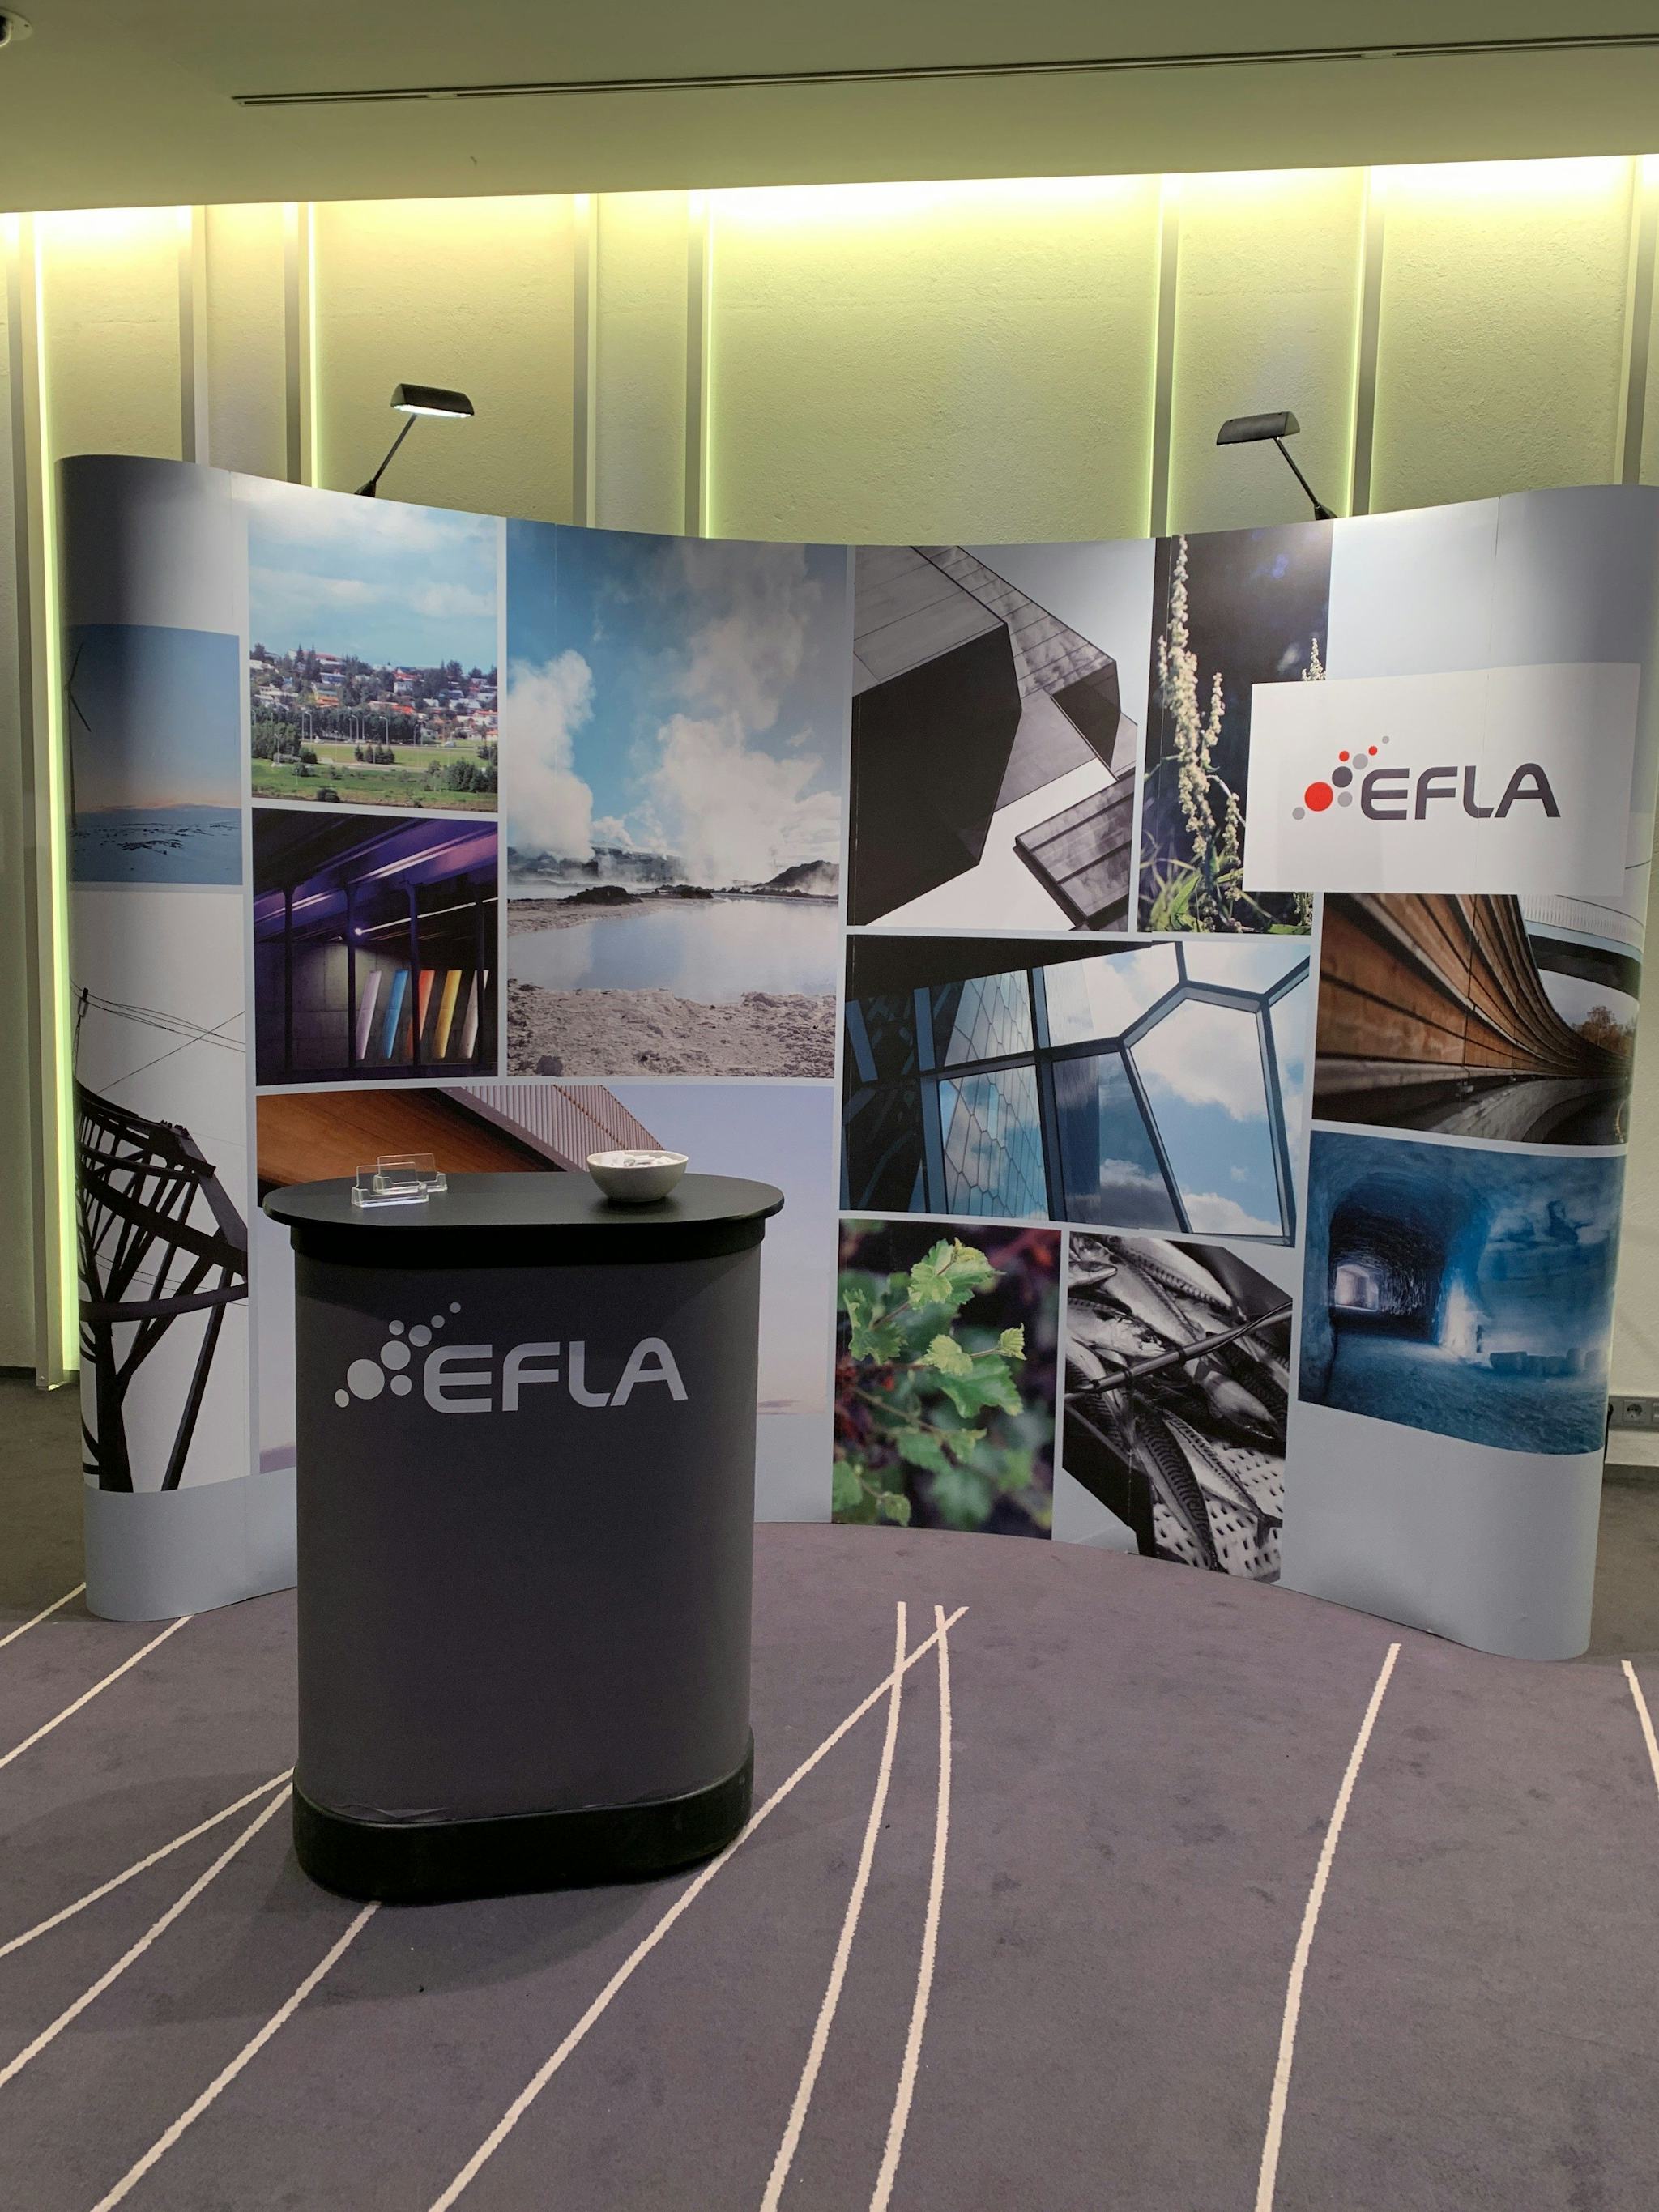 ELFA promotional booth with big banner